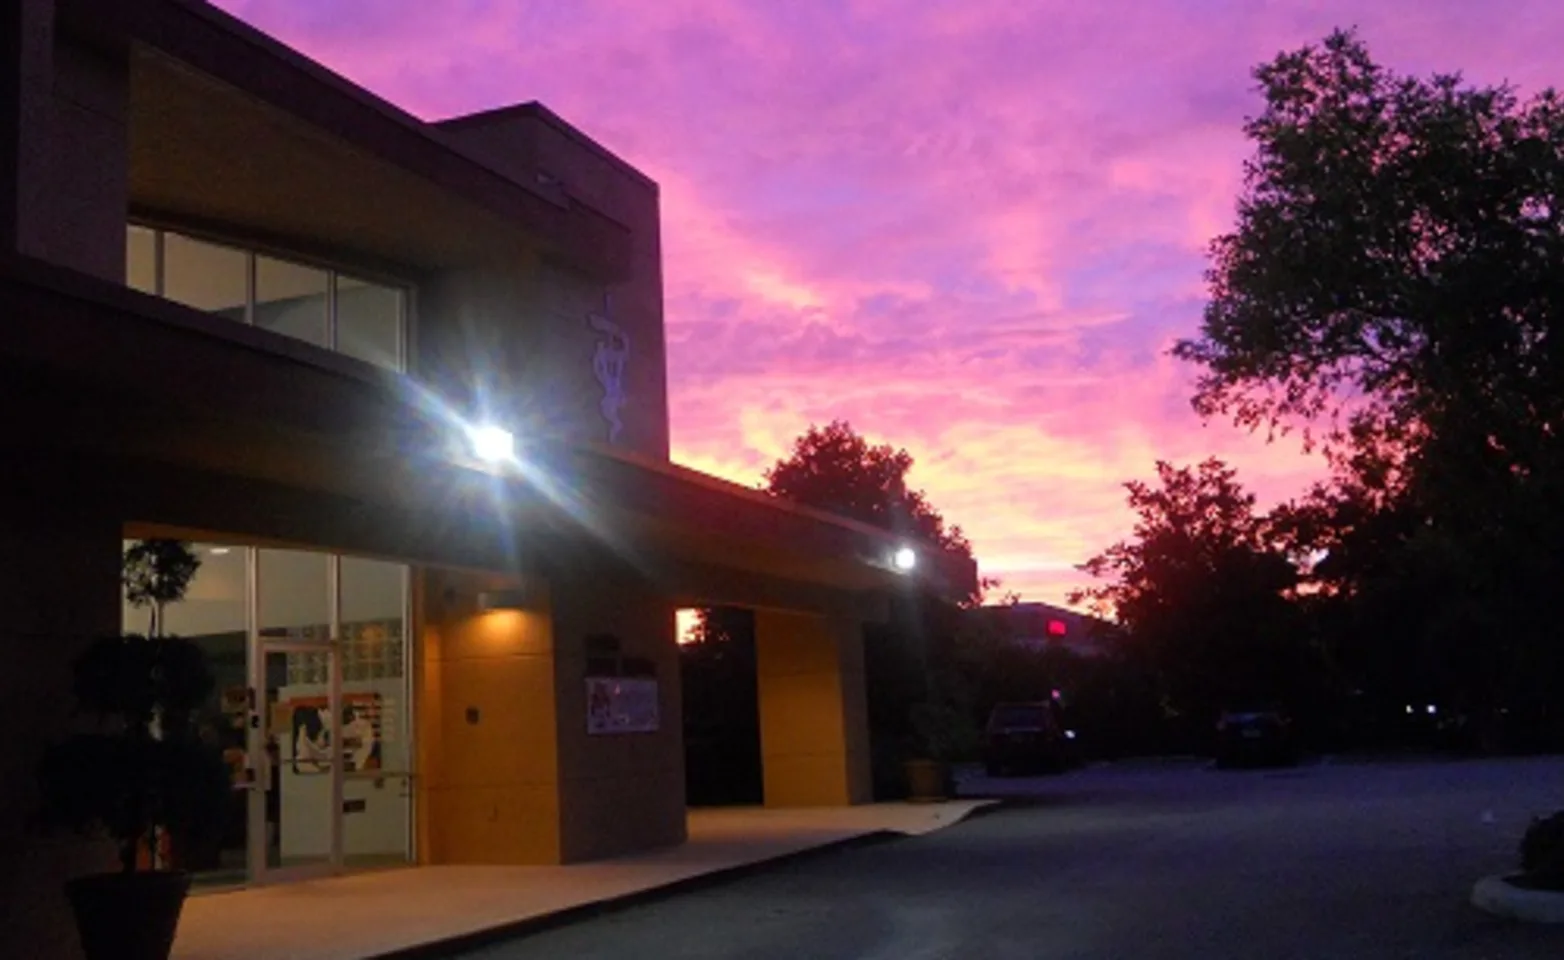 Exterior view of the building at night with a pink sky.